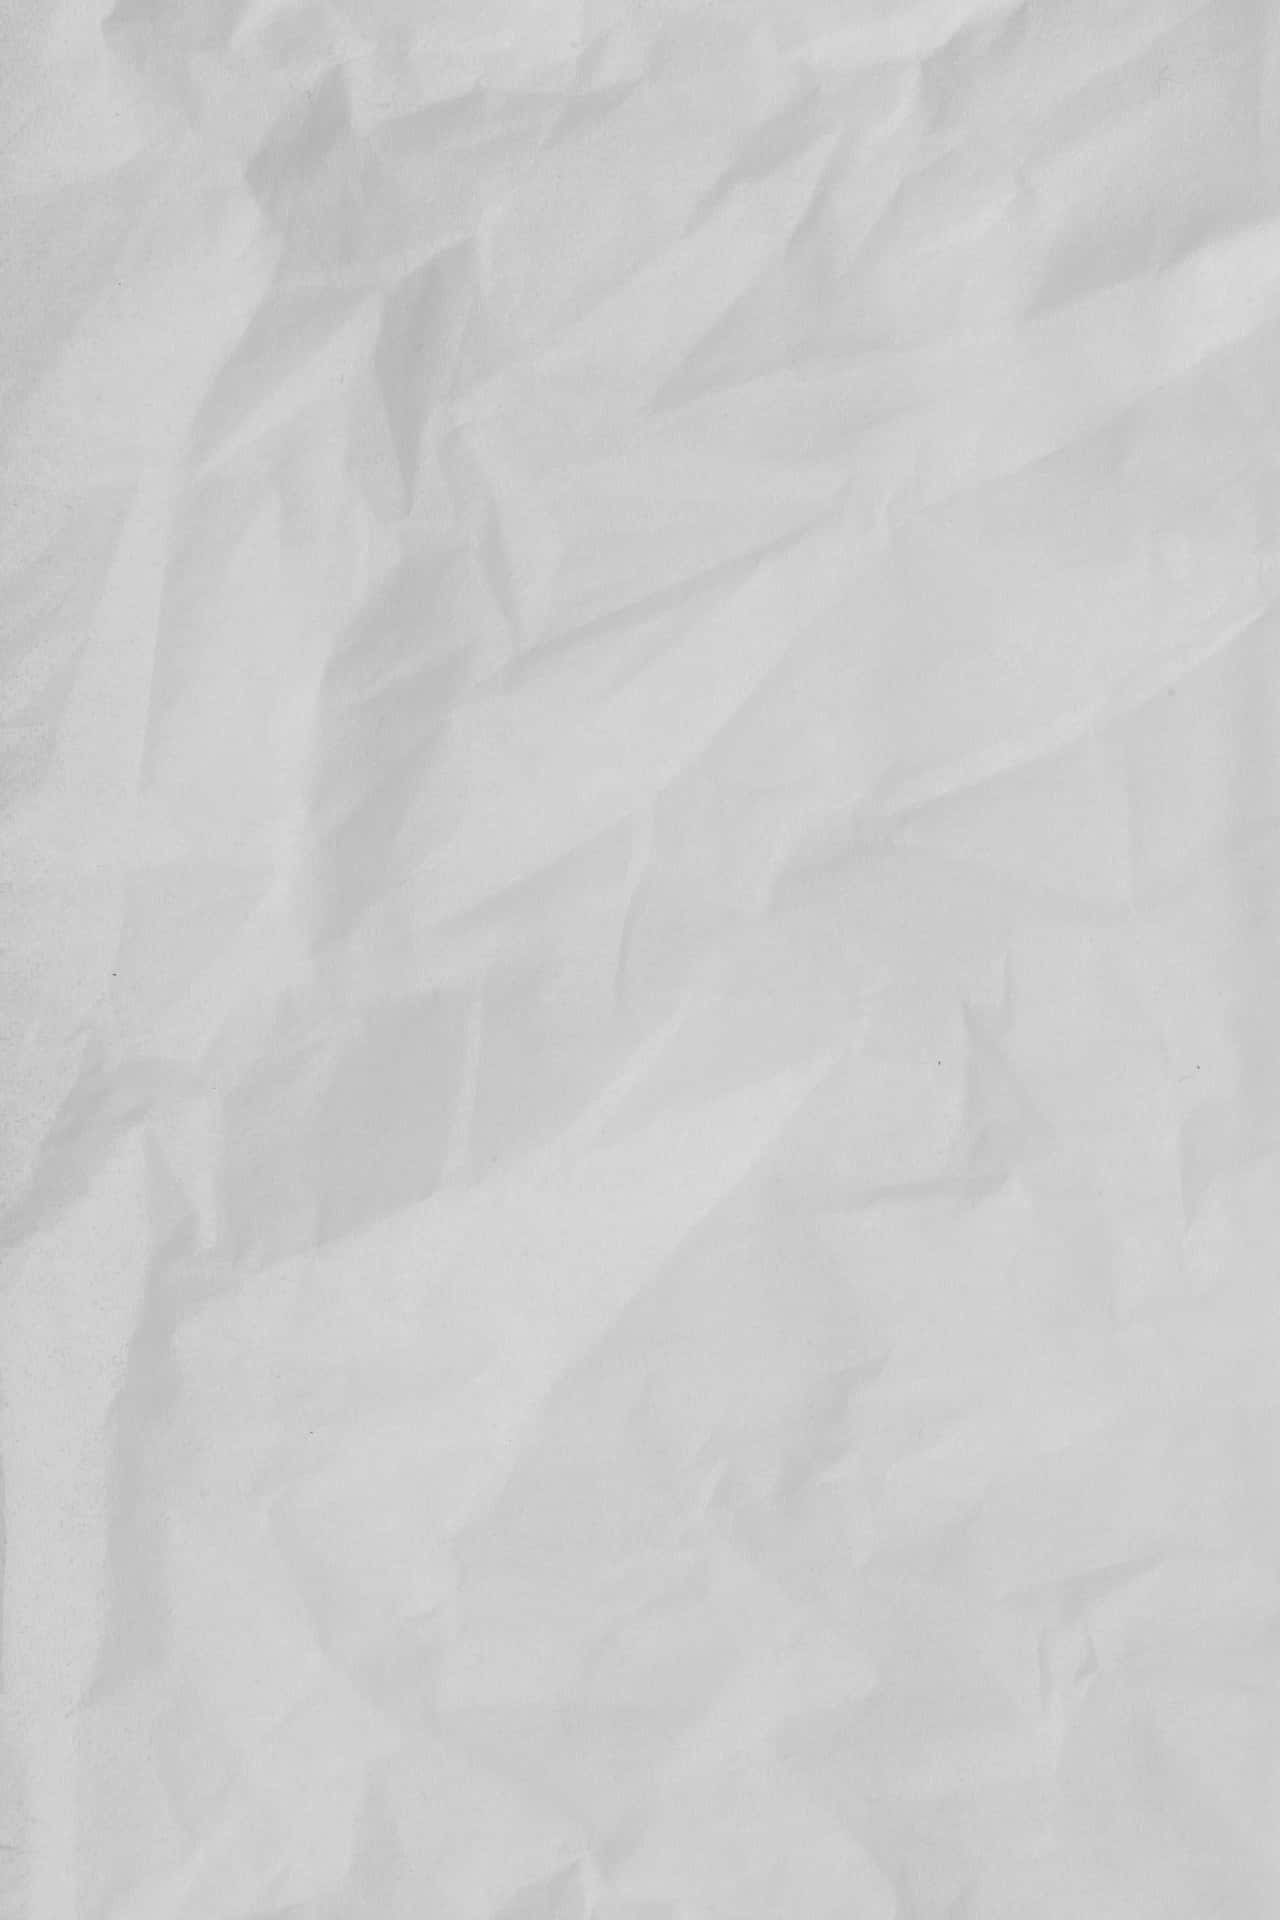 A White Paper Texture With Crumpled Paper